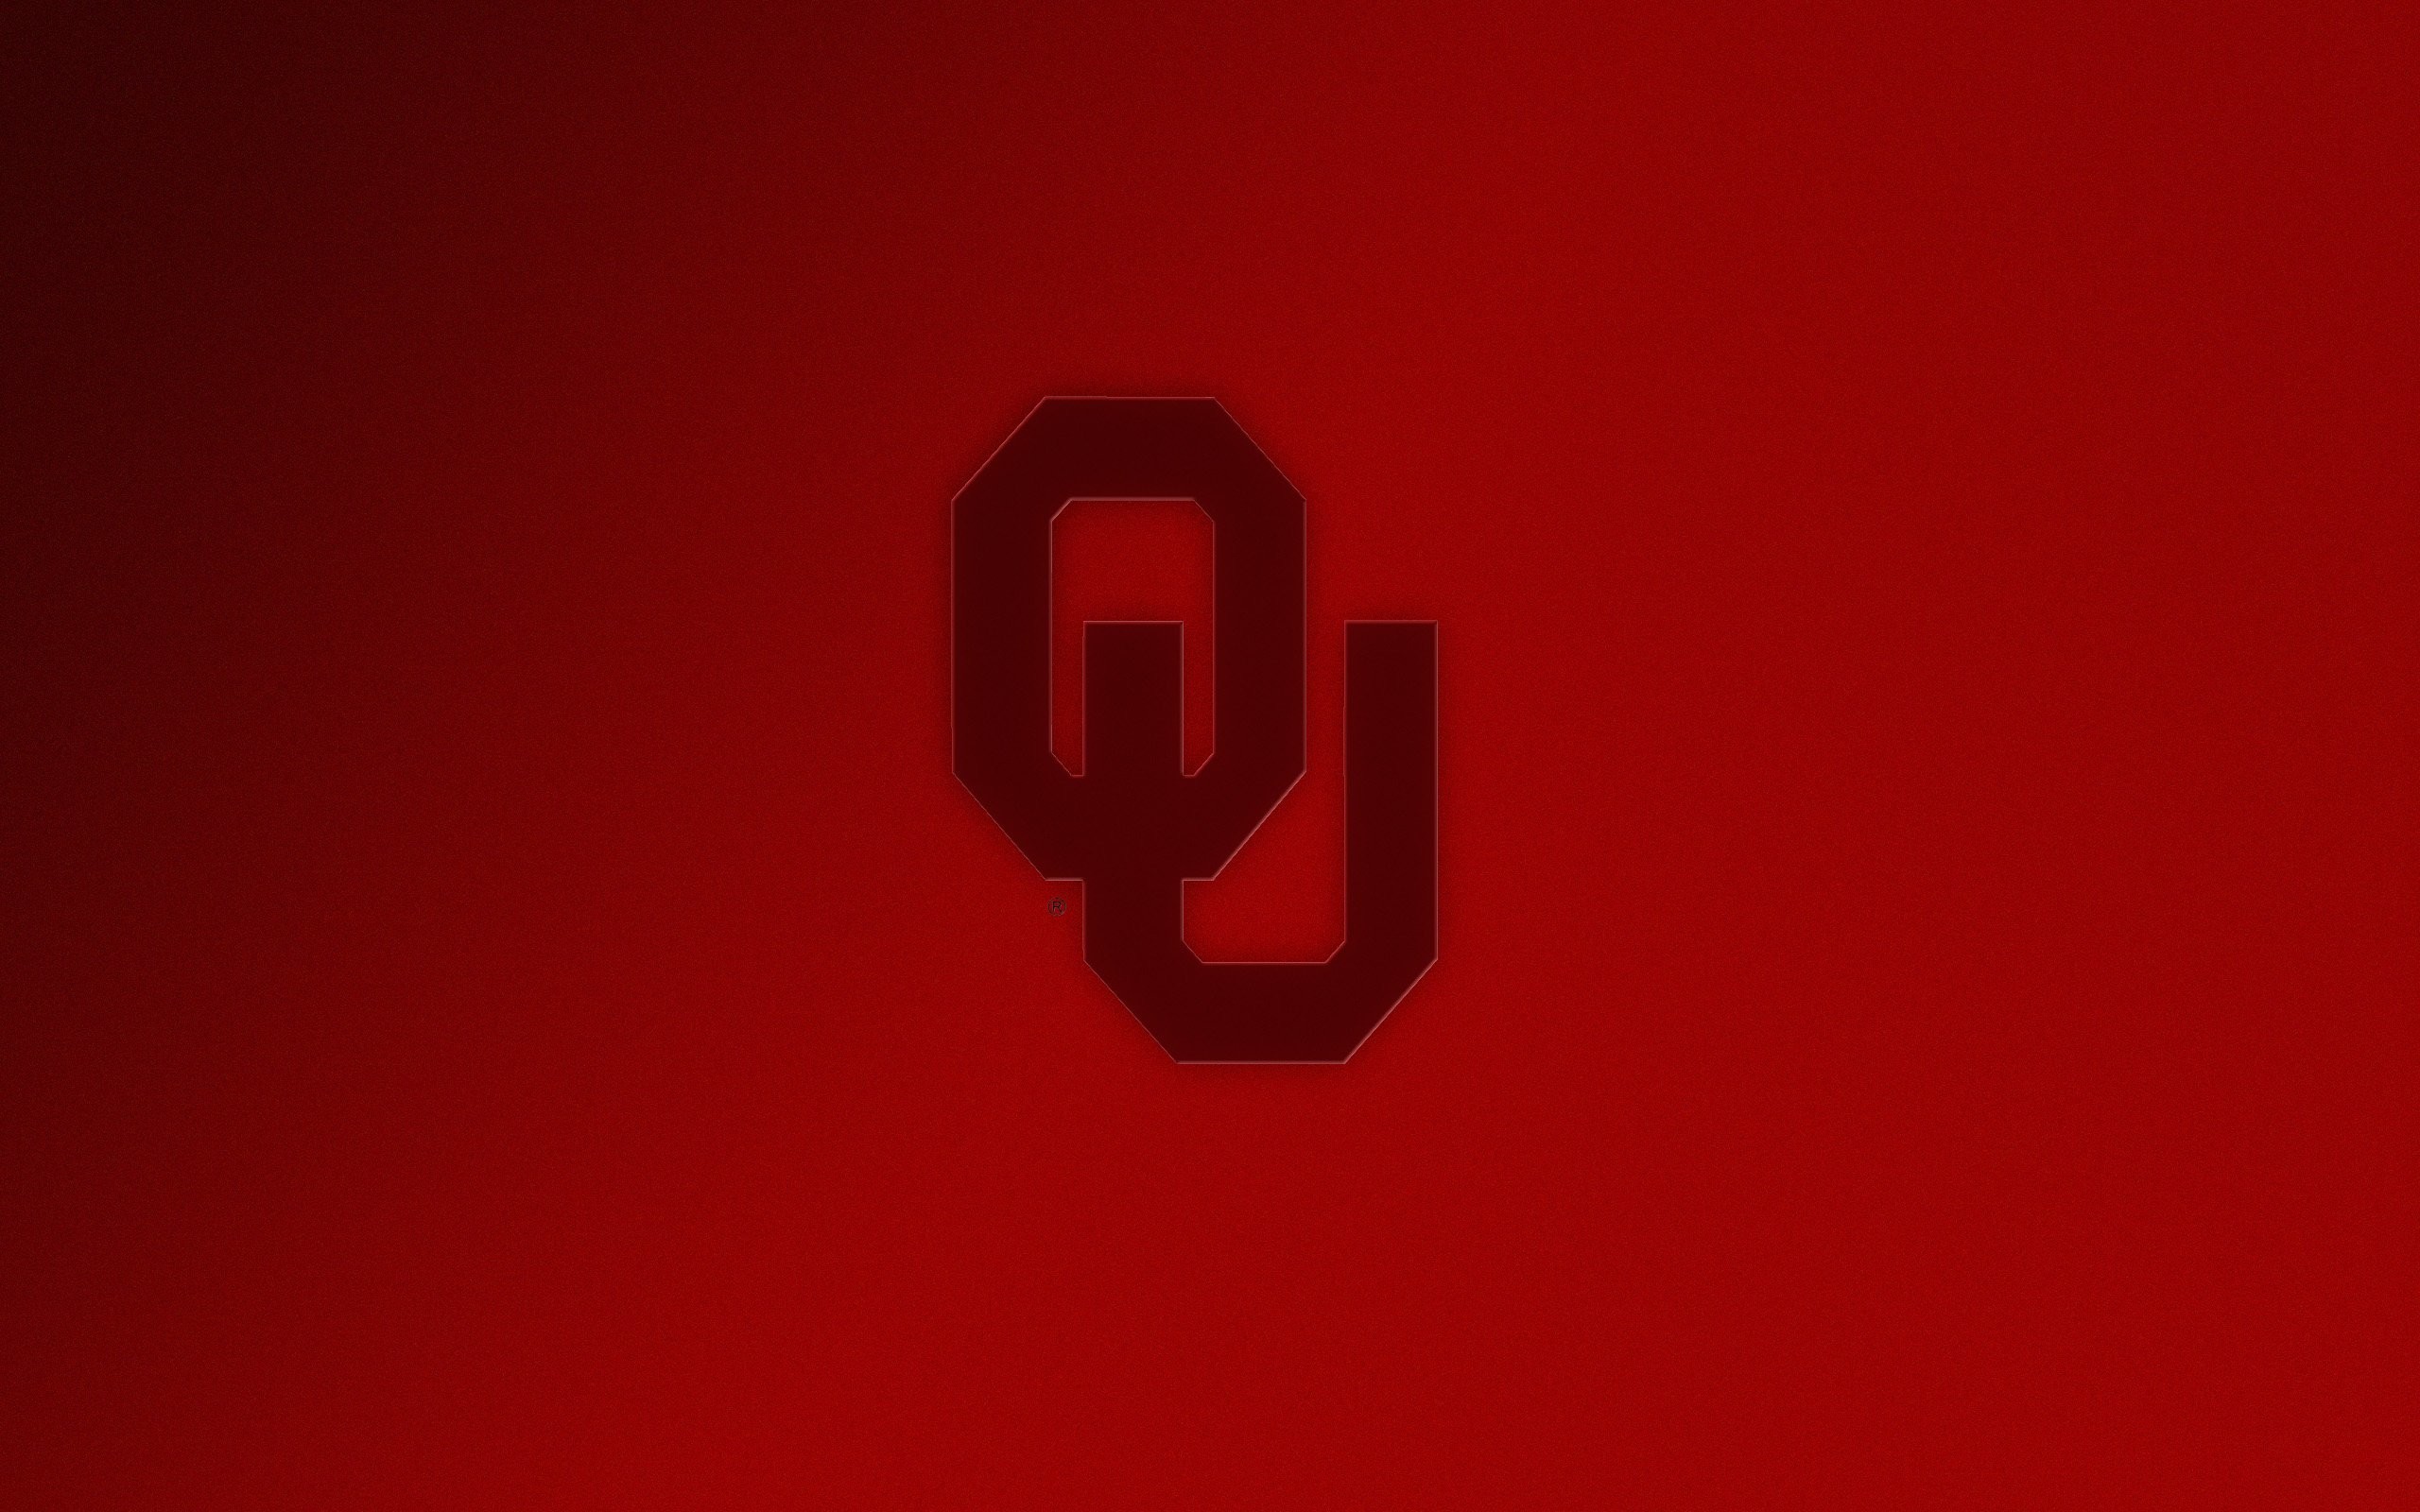 Download wallpapers oklahoma sooners logo for desktop free High Quality HD  pictures wallpapers  Page 1